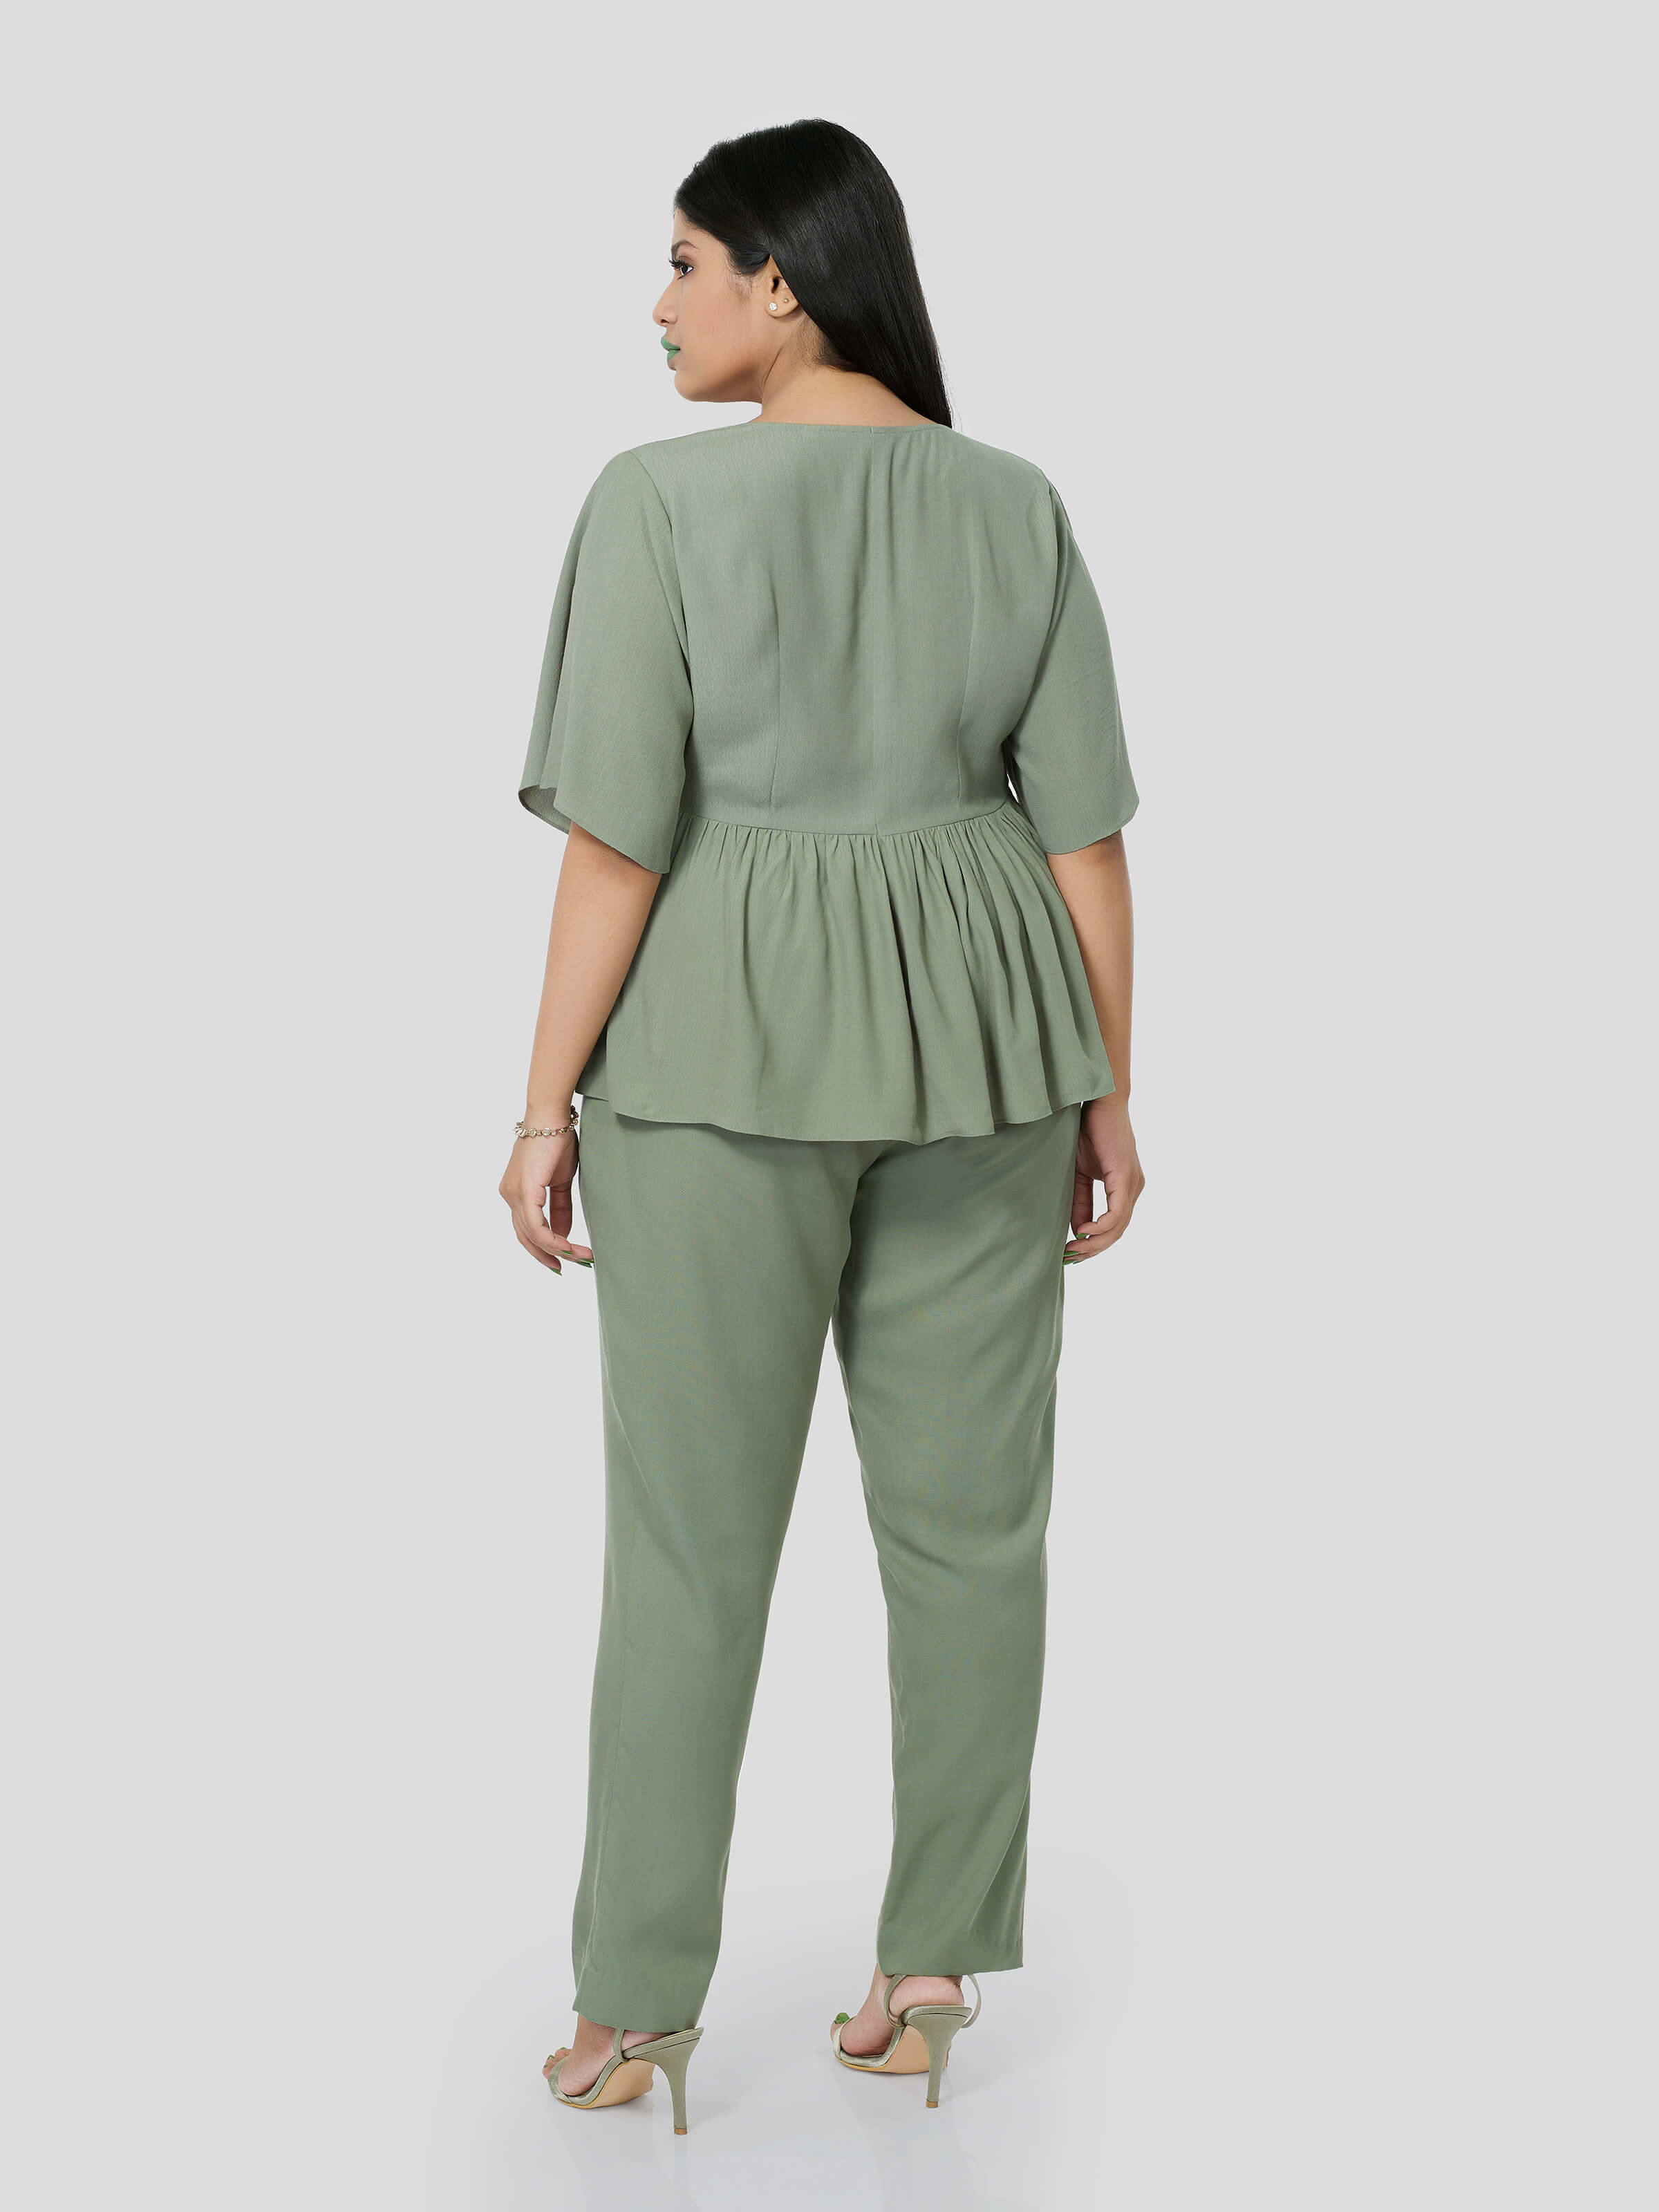 Green Flared Top with Narrow Pants - Zest Mélange 